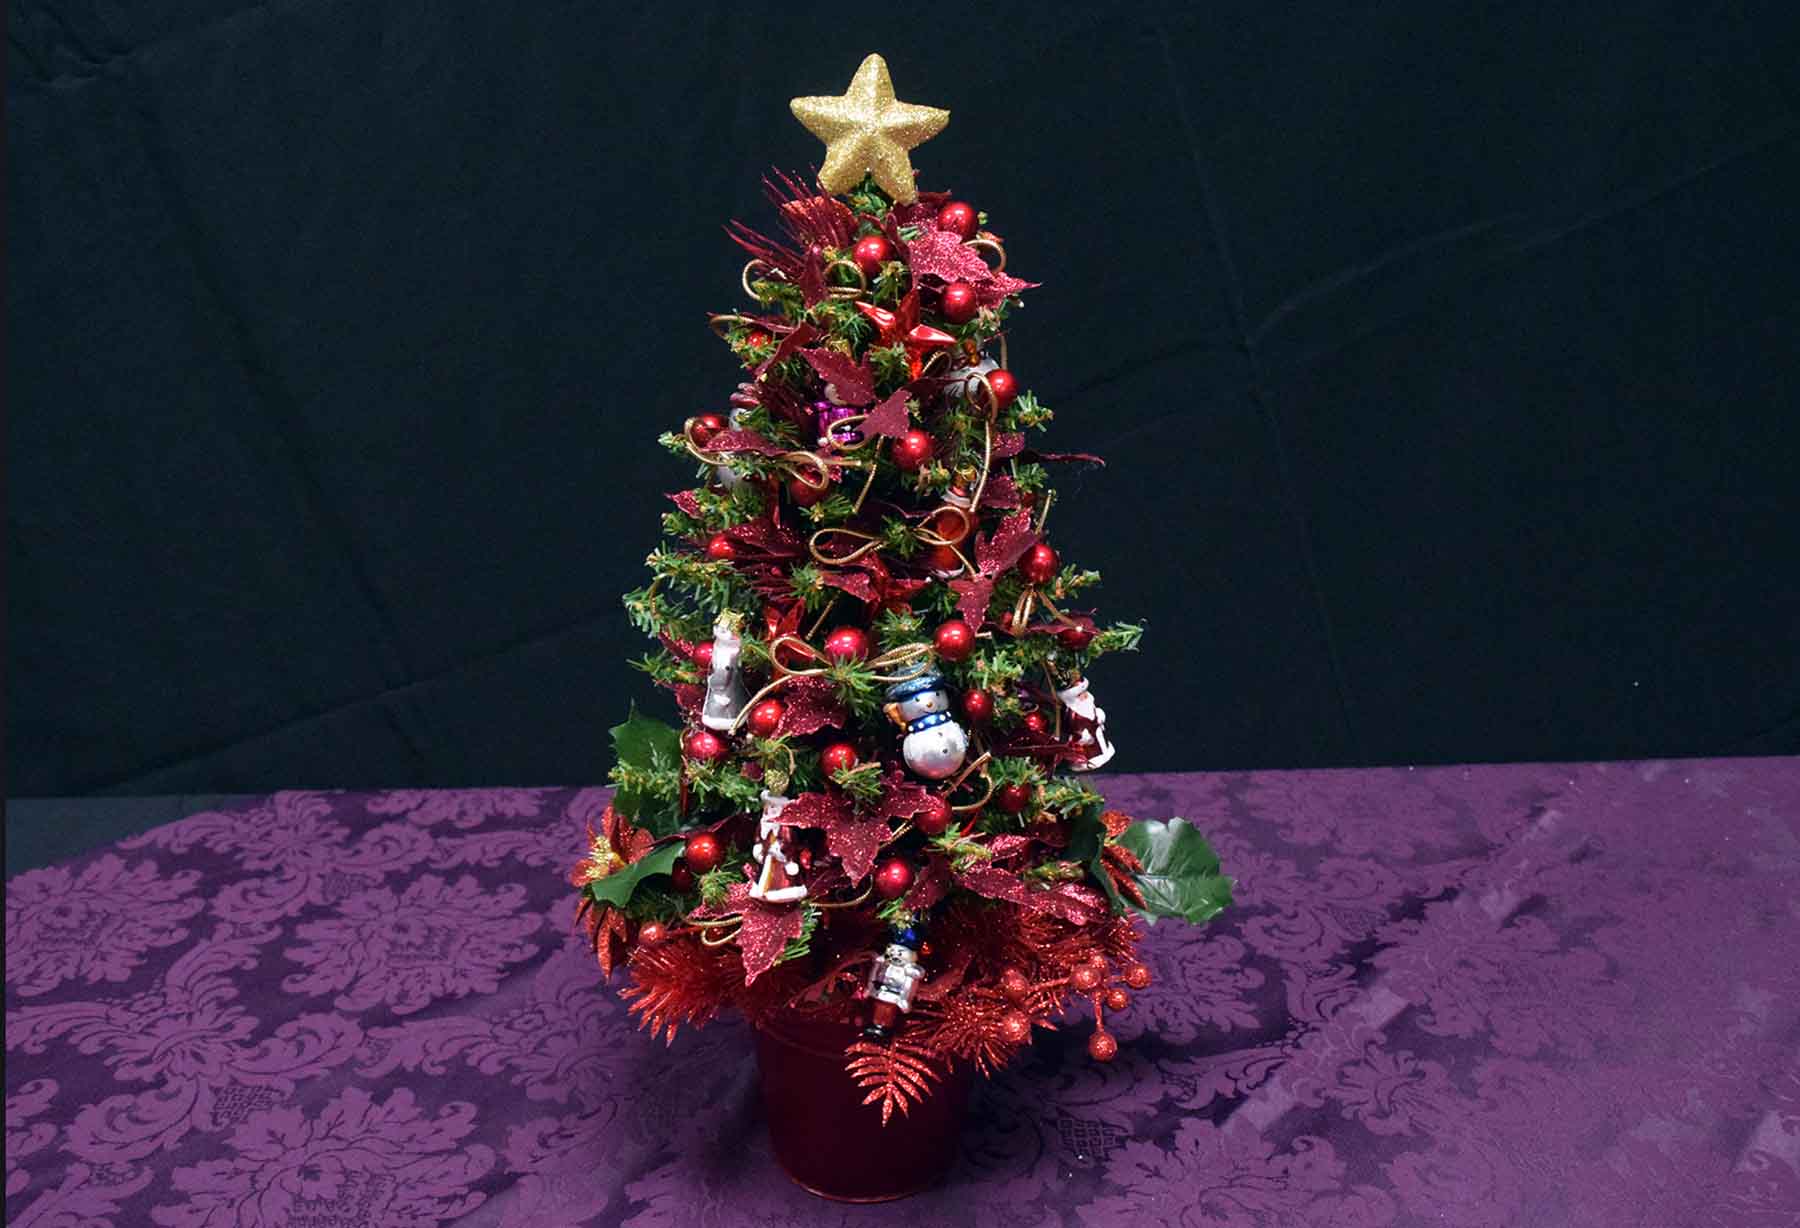 C16_--_Red_sparkle_tree_with_small_wooden_ornaments.jpg